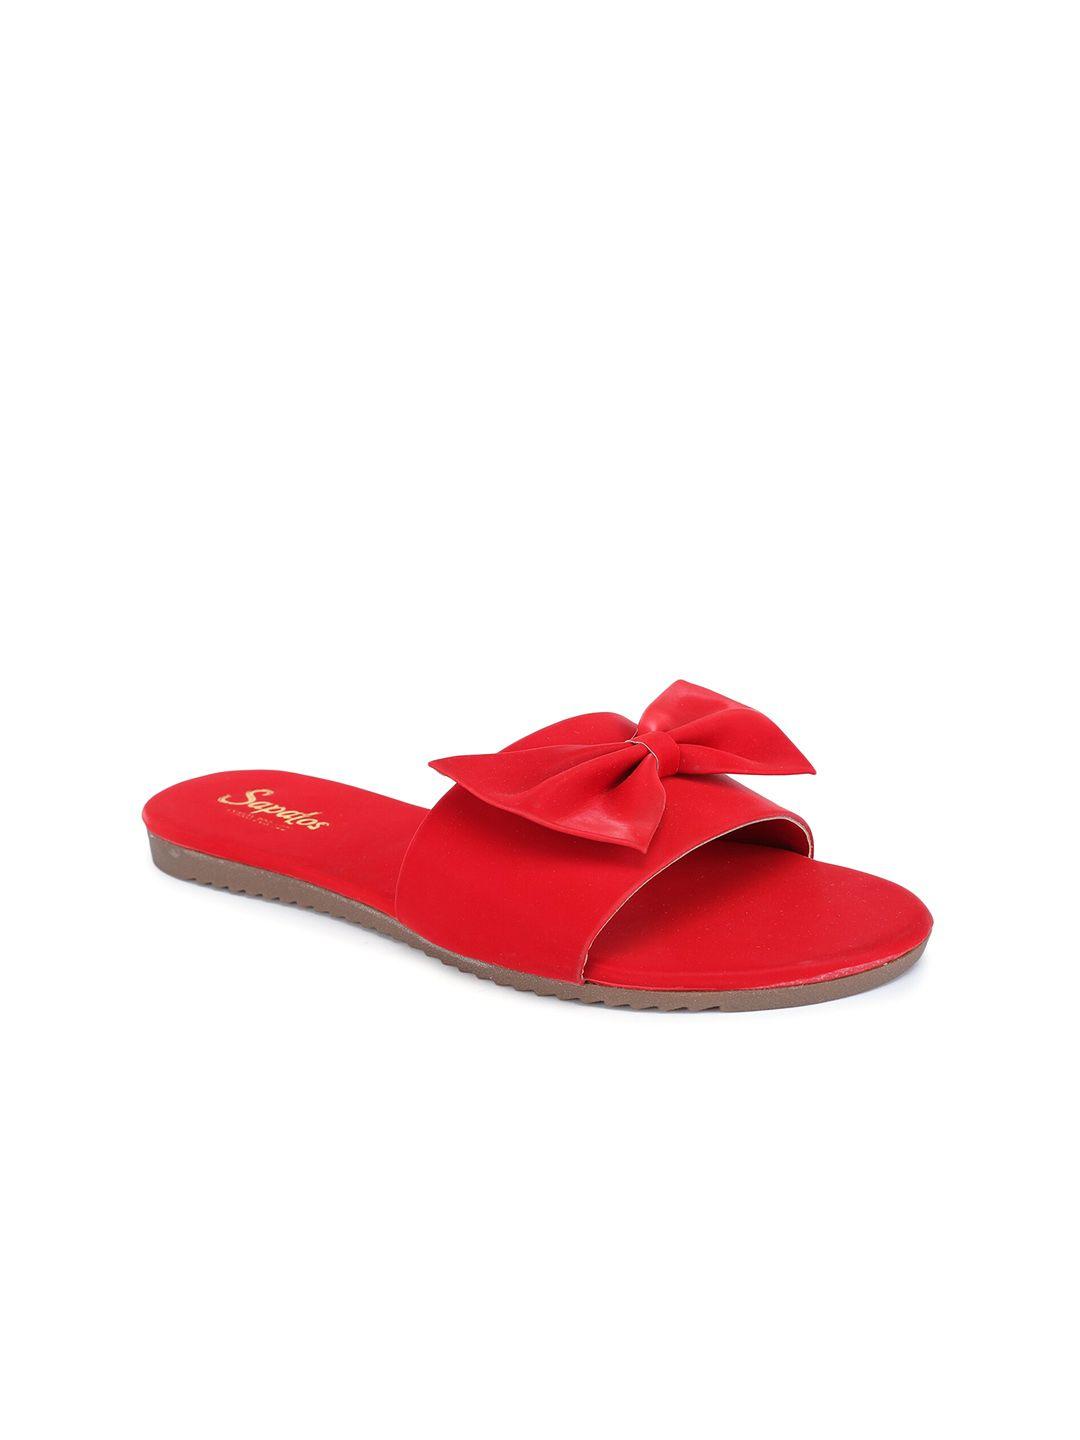 sapatos women open toe flats with bows